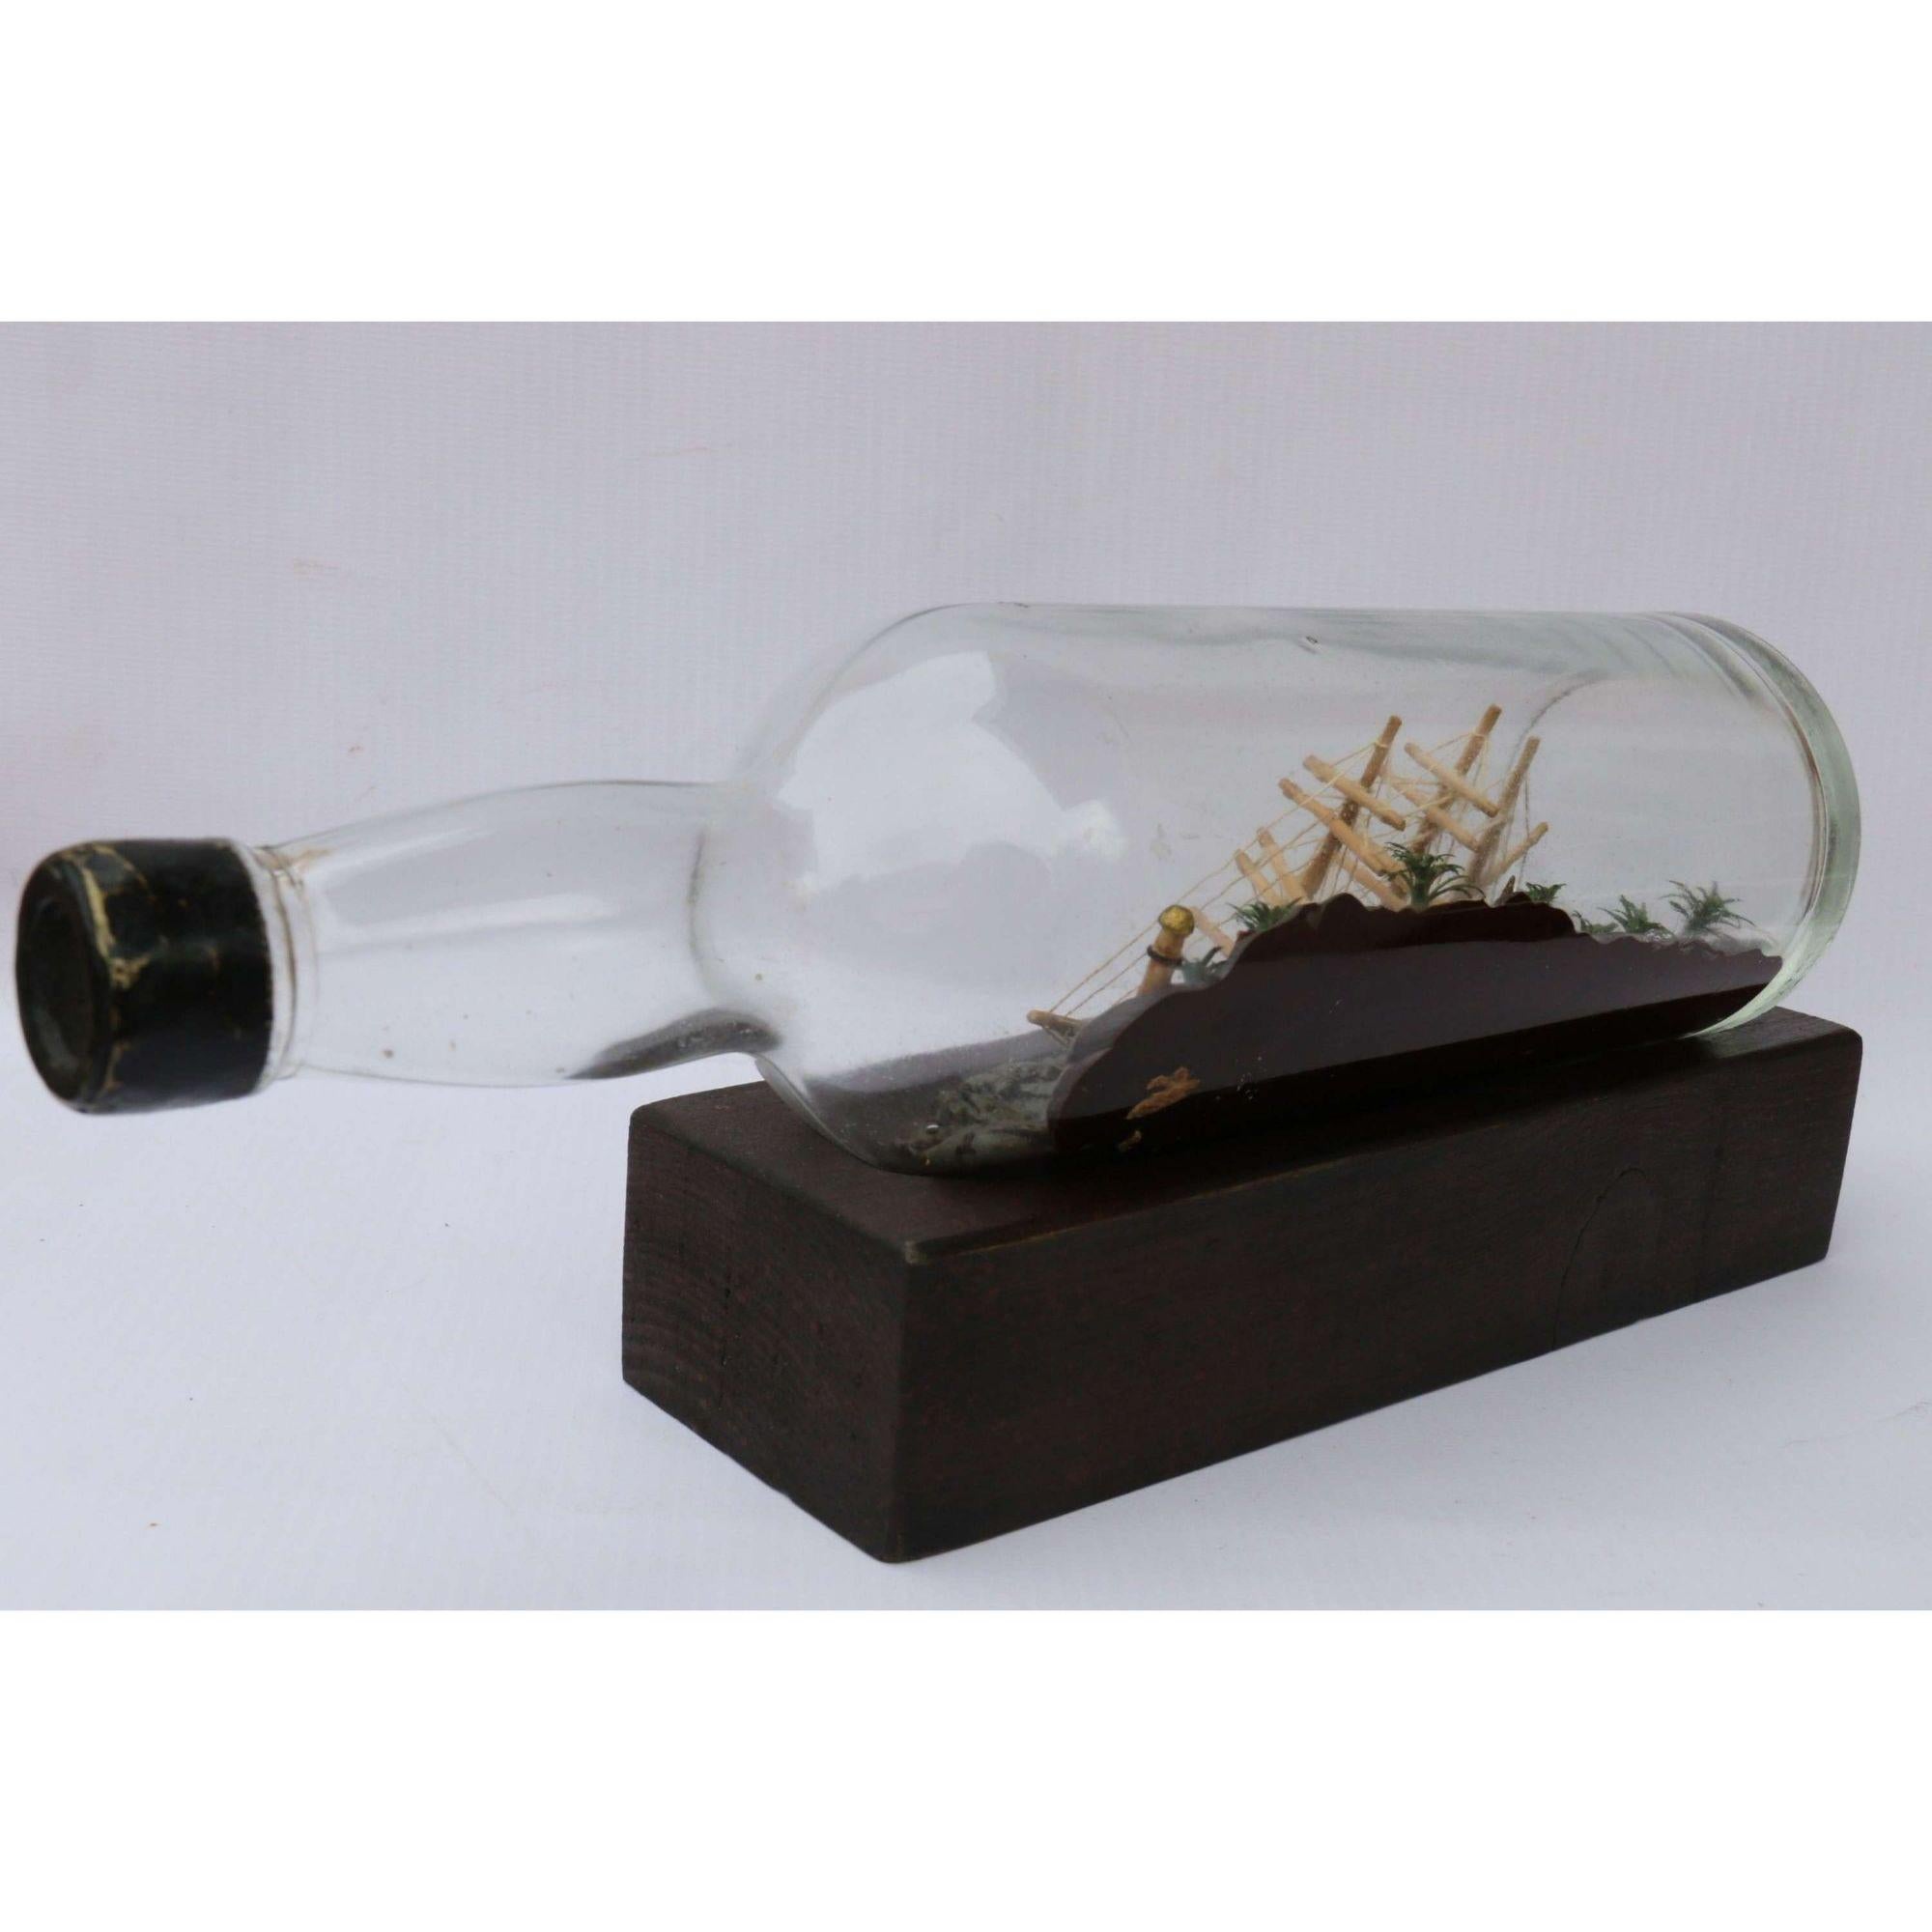 Hand-Painted Early 20th Century Model Ship Diorama Within a Bottle, circa 1920 For Sale